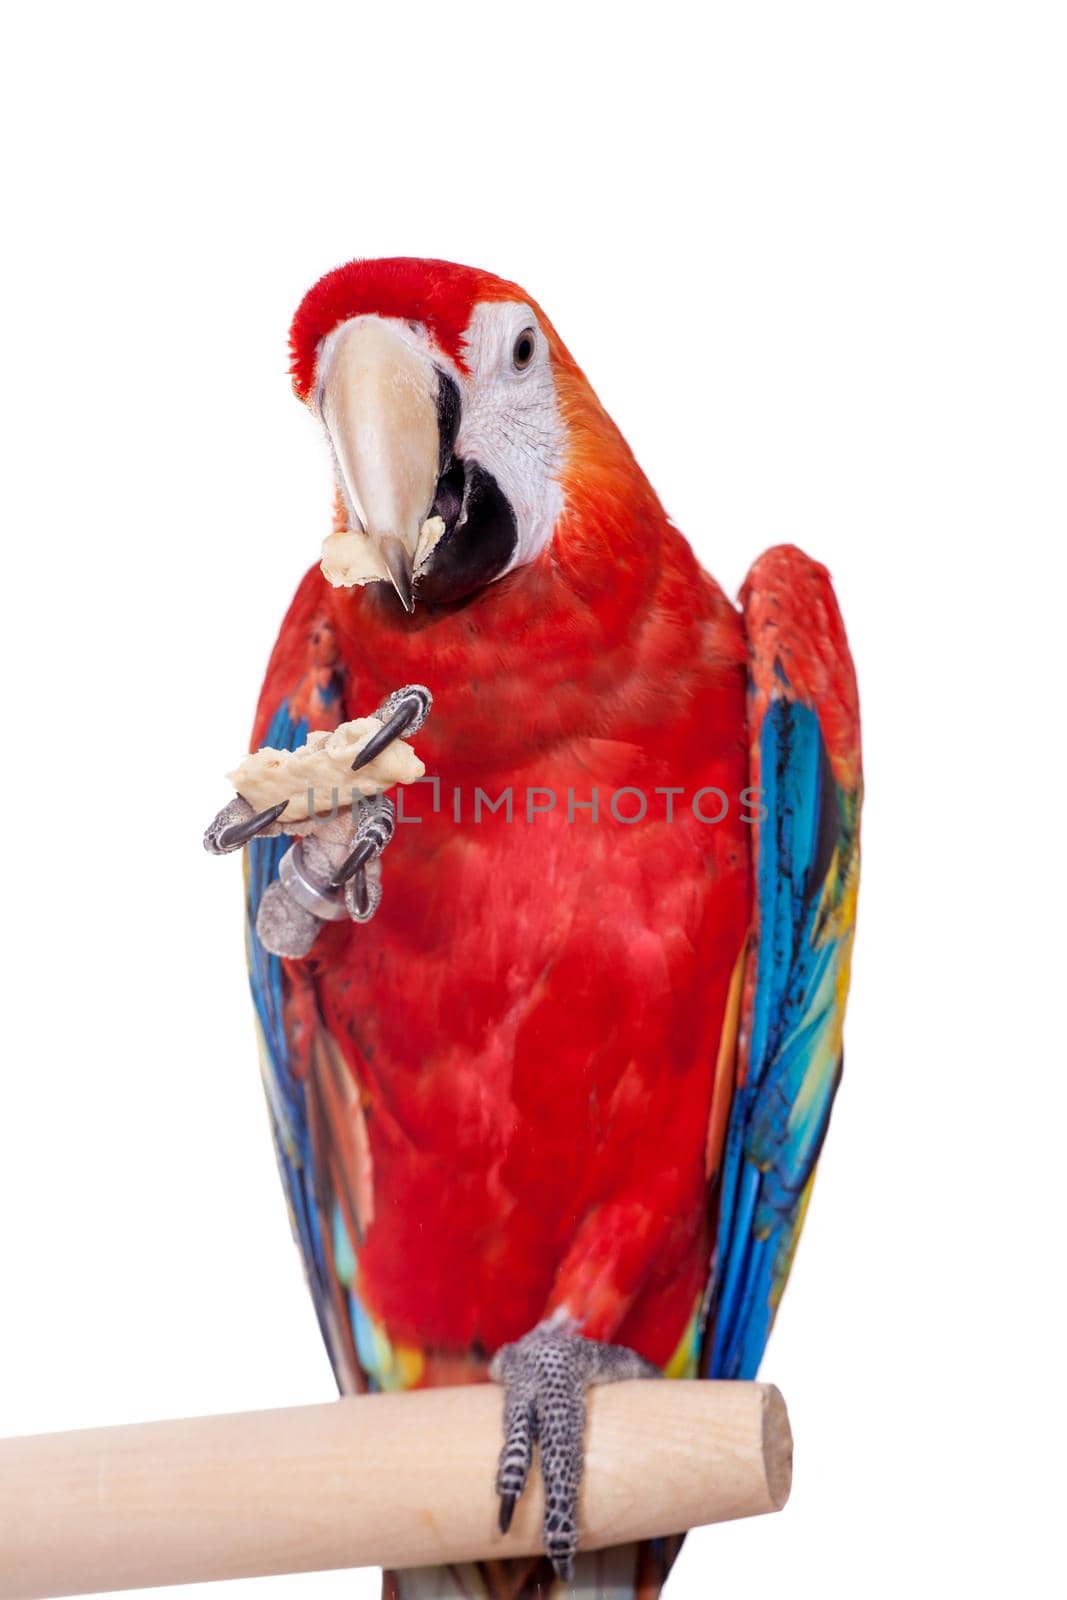 Scarlet macaws - Ara macao, eating on the white background